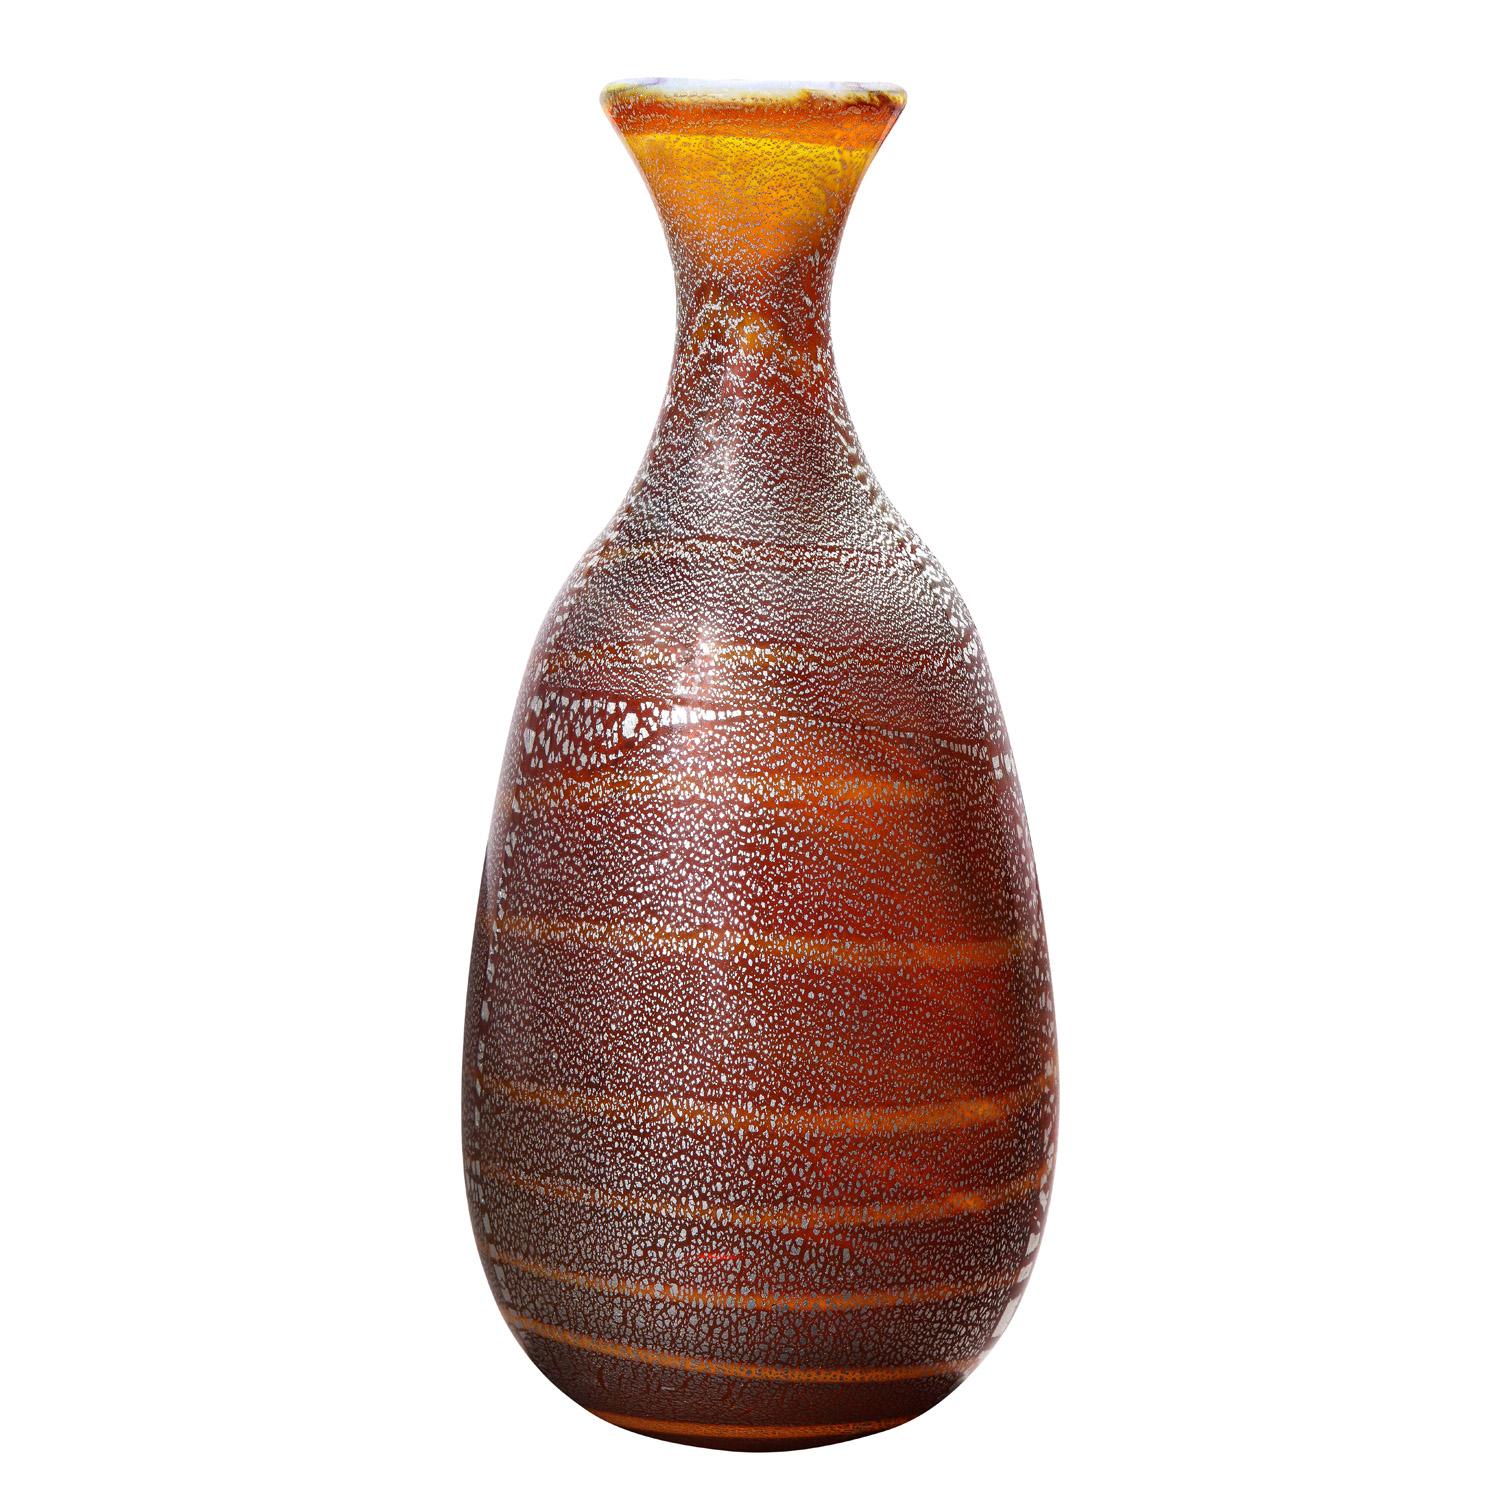 Hand-blown glass vase, amber with silver foil and spiral design, by Giulio Radi for A.V.E.M., Murano Italy, ca 1950. The coloration and silver foil make this piece sublime.

Reference:
AVEM Artistic Production 1932-1972 by Marc Heiremans